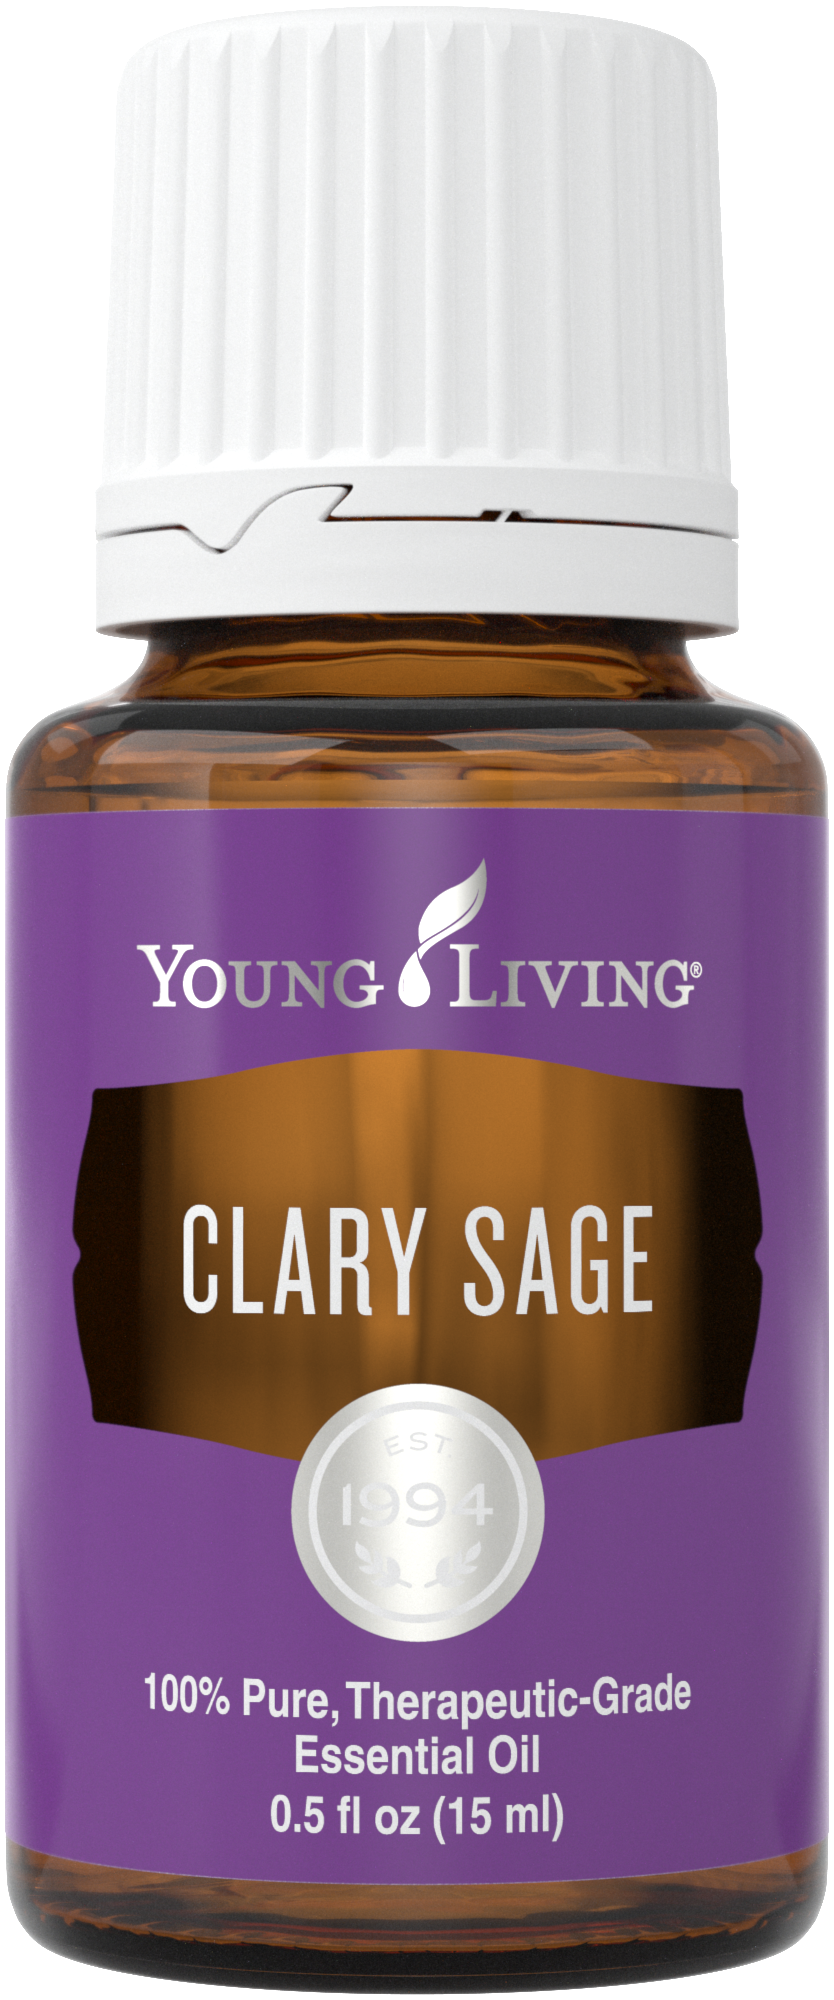 Clary Sage 15ml Silo.png